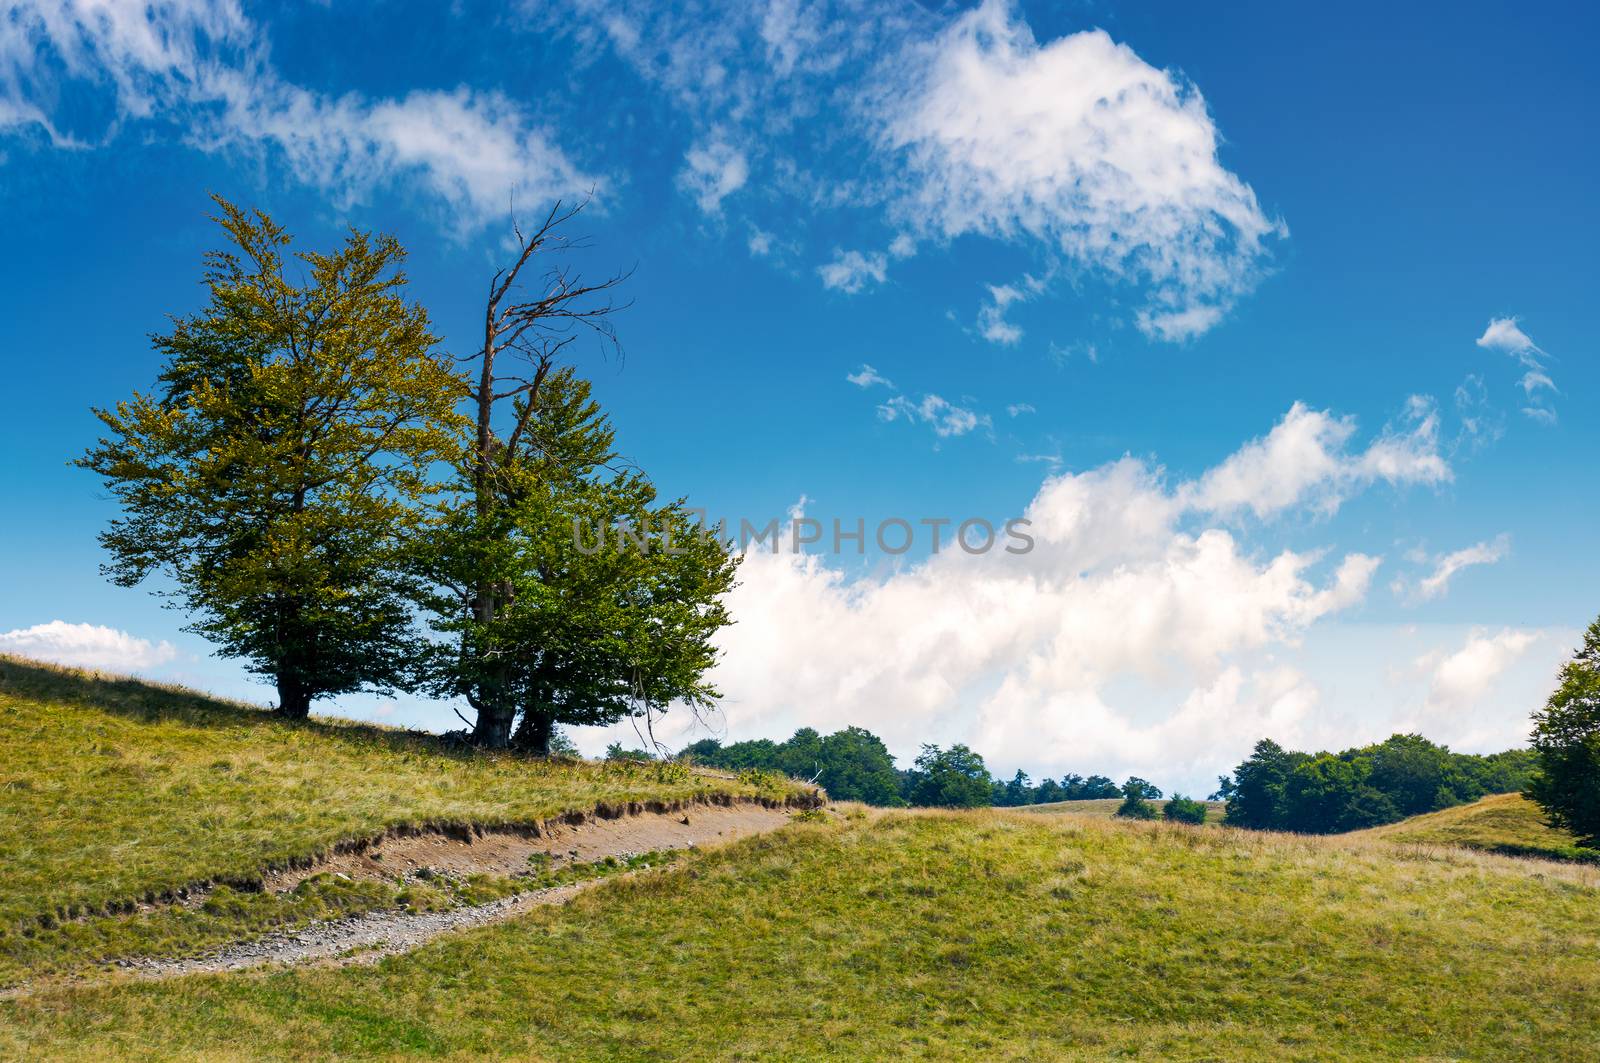 trees on the grassy alpine meadow of Carpathians. beautiful mountain landscape with beech forests on hillside in summer